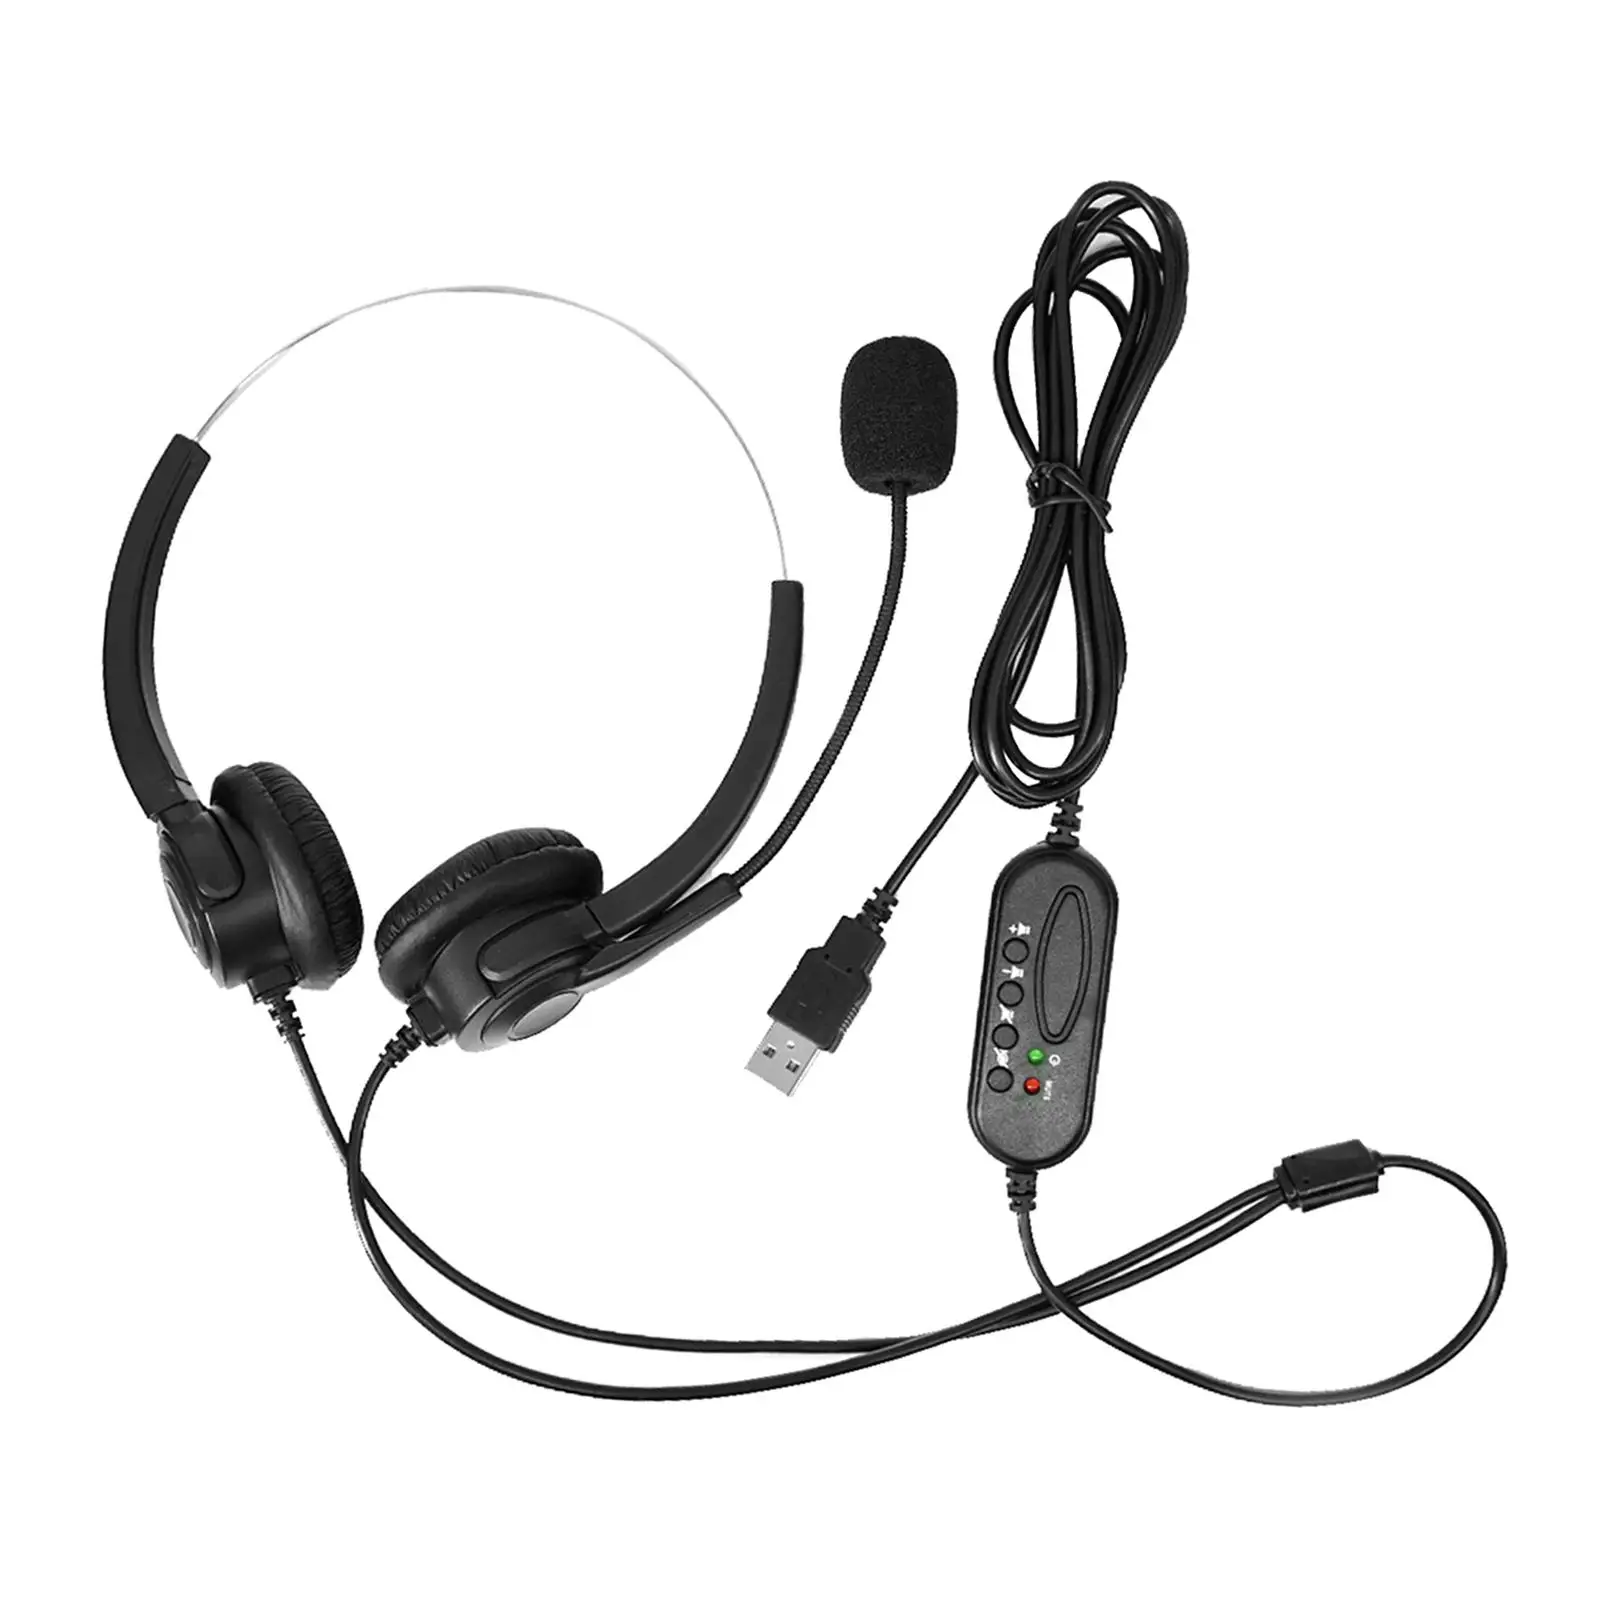 USB Headsets Noise Canceling Headphones with Microphone Inline Control